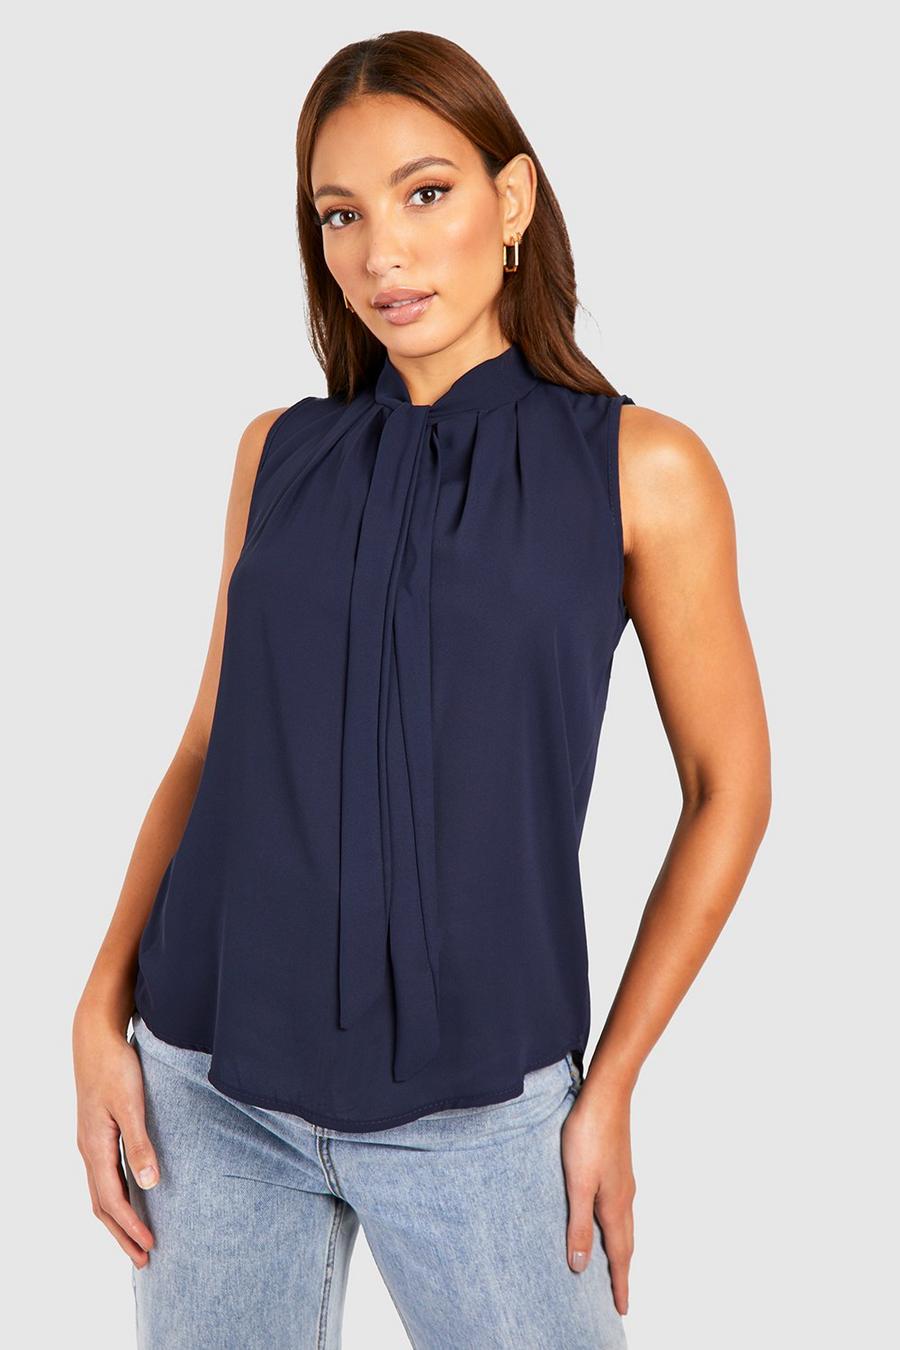 Navy blu oltremare Tall Pussybow Sleeveless Blouse